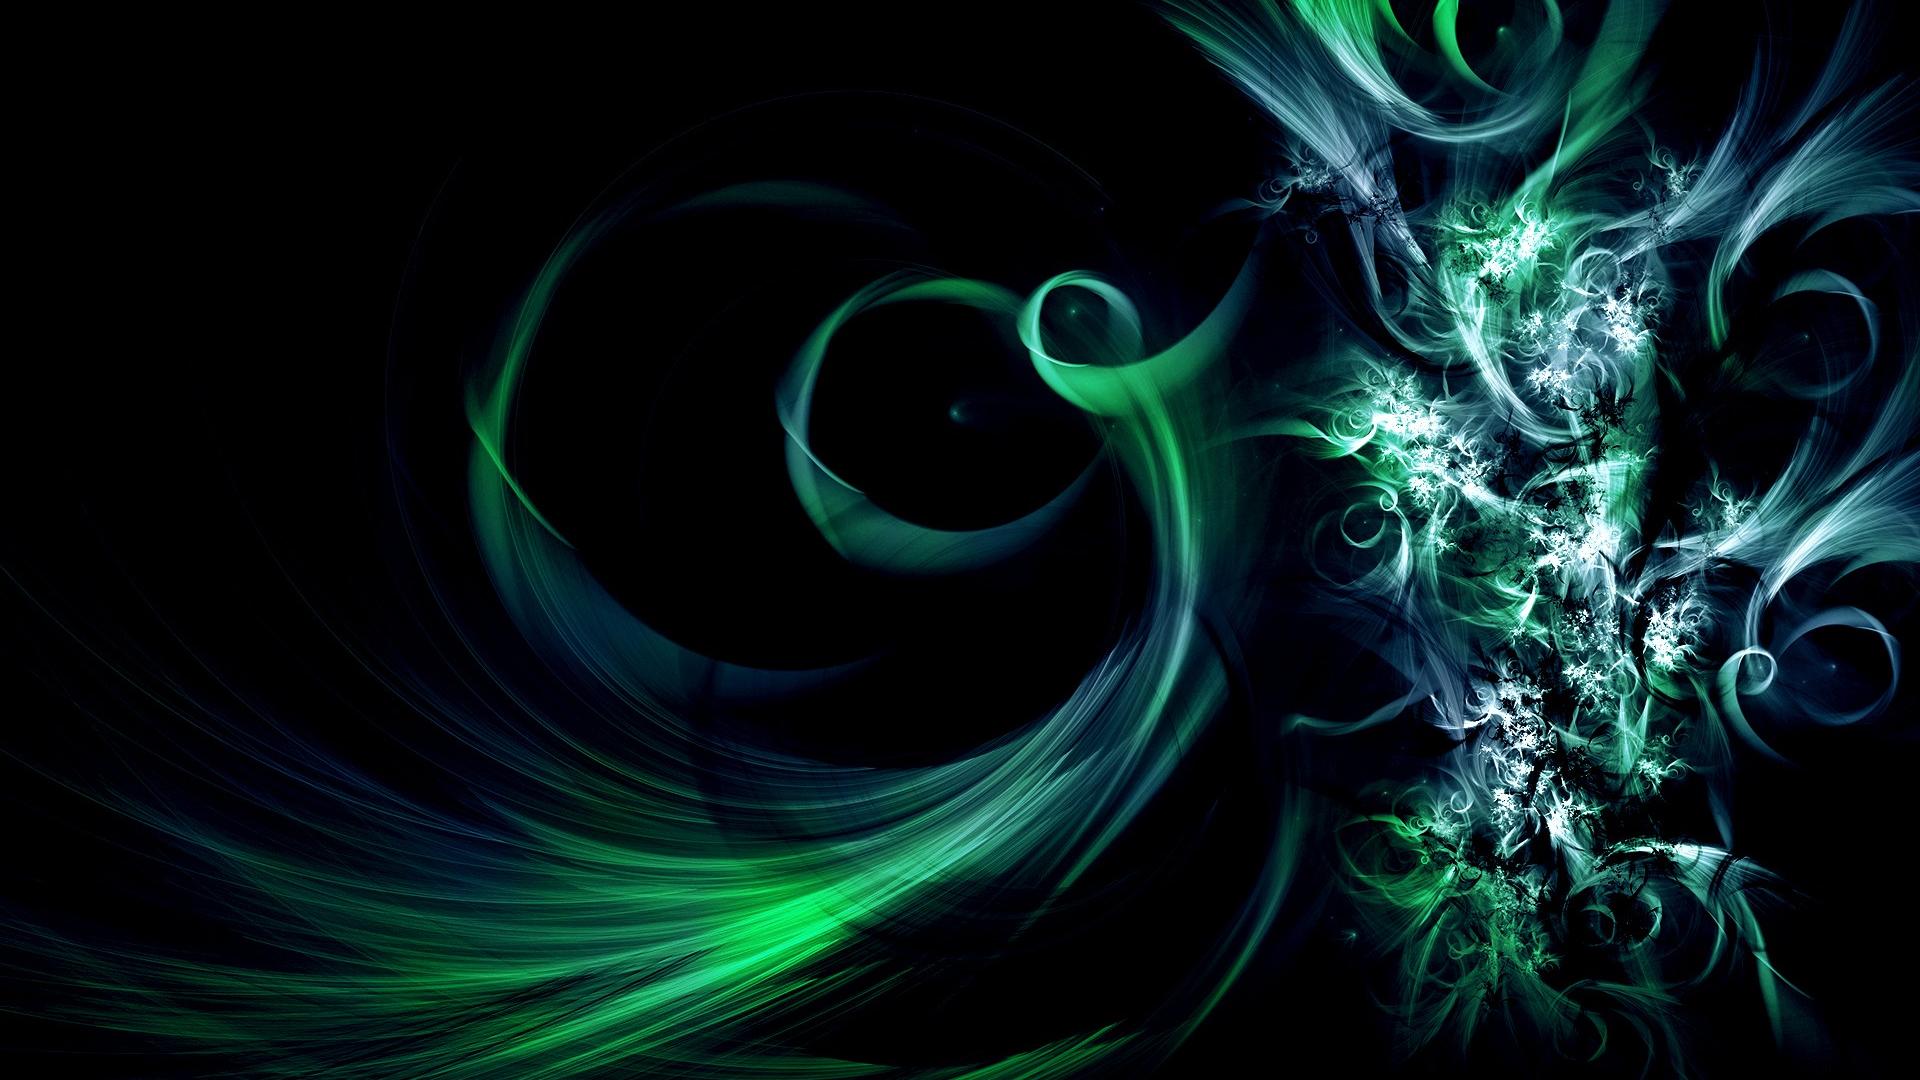 Abstract Cool wallpaper | 1920x1080 | #44640